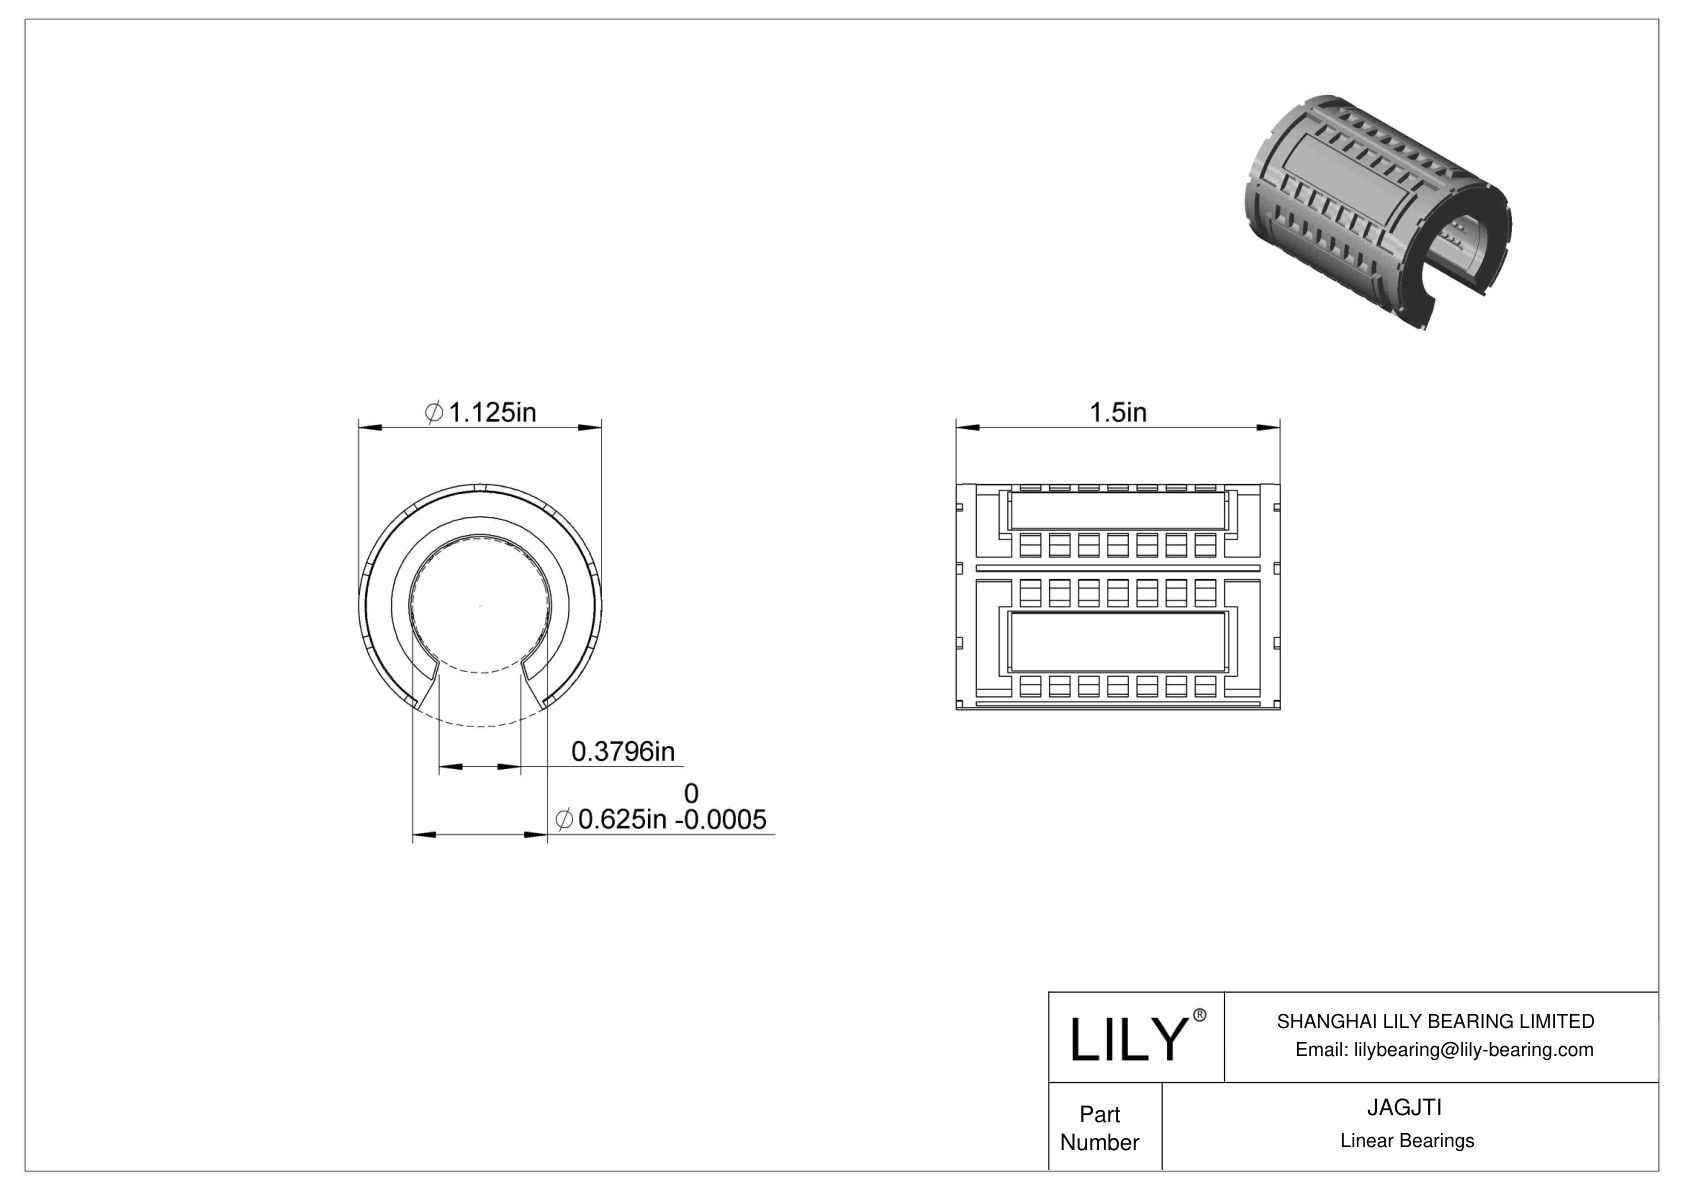 JAGJTI High-Load Linear Ball Bearings for Support Rail Shafts cad drawing